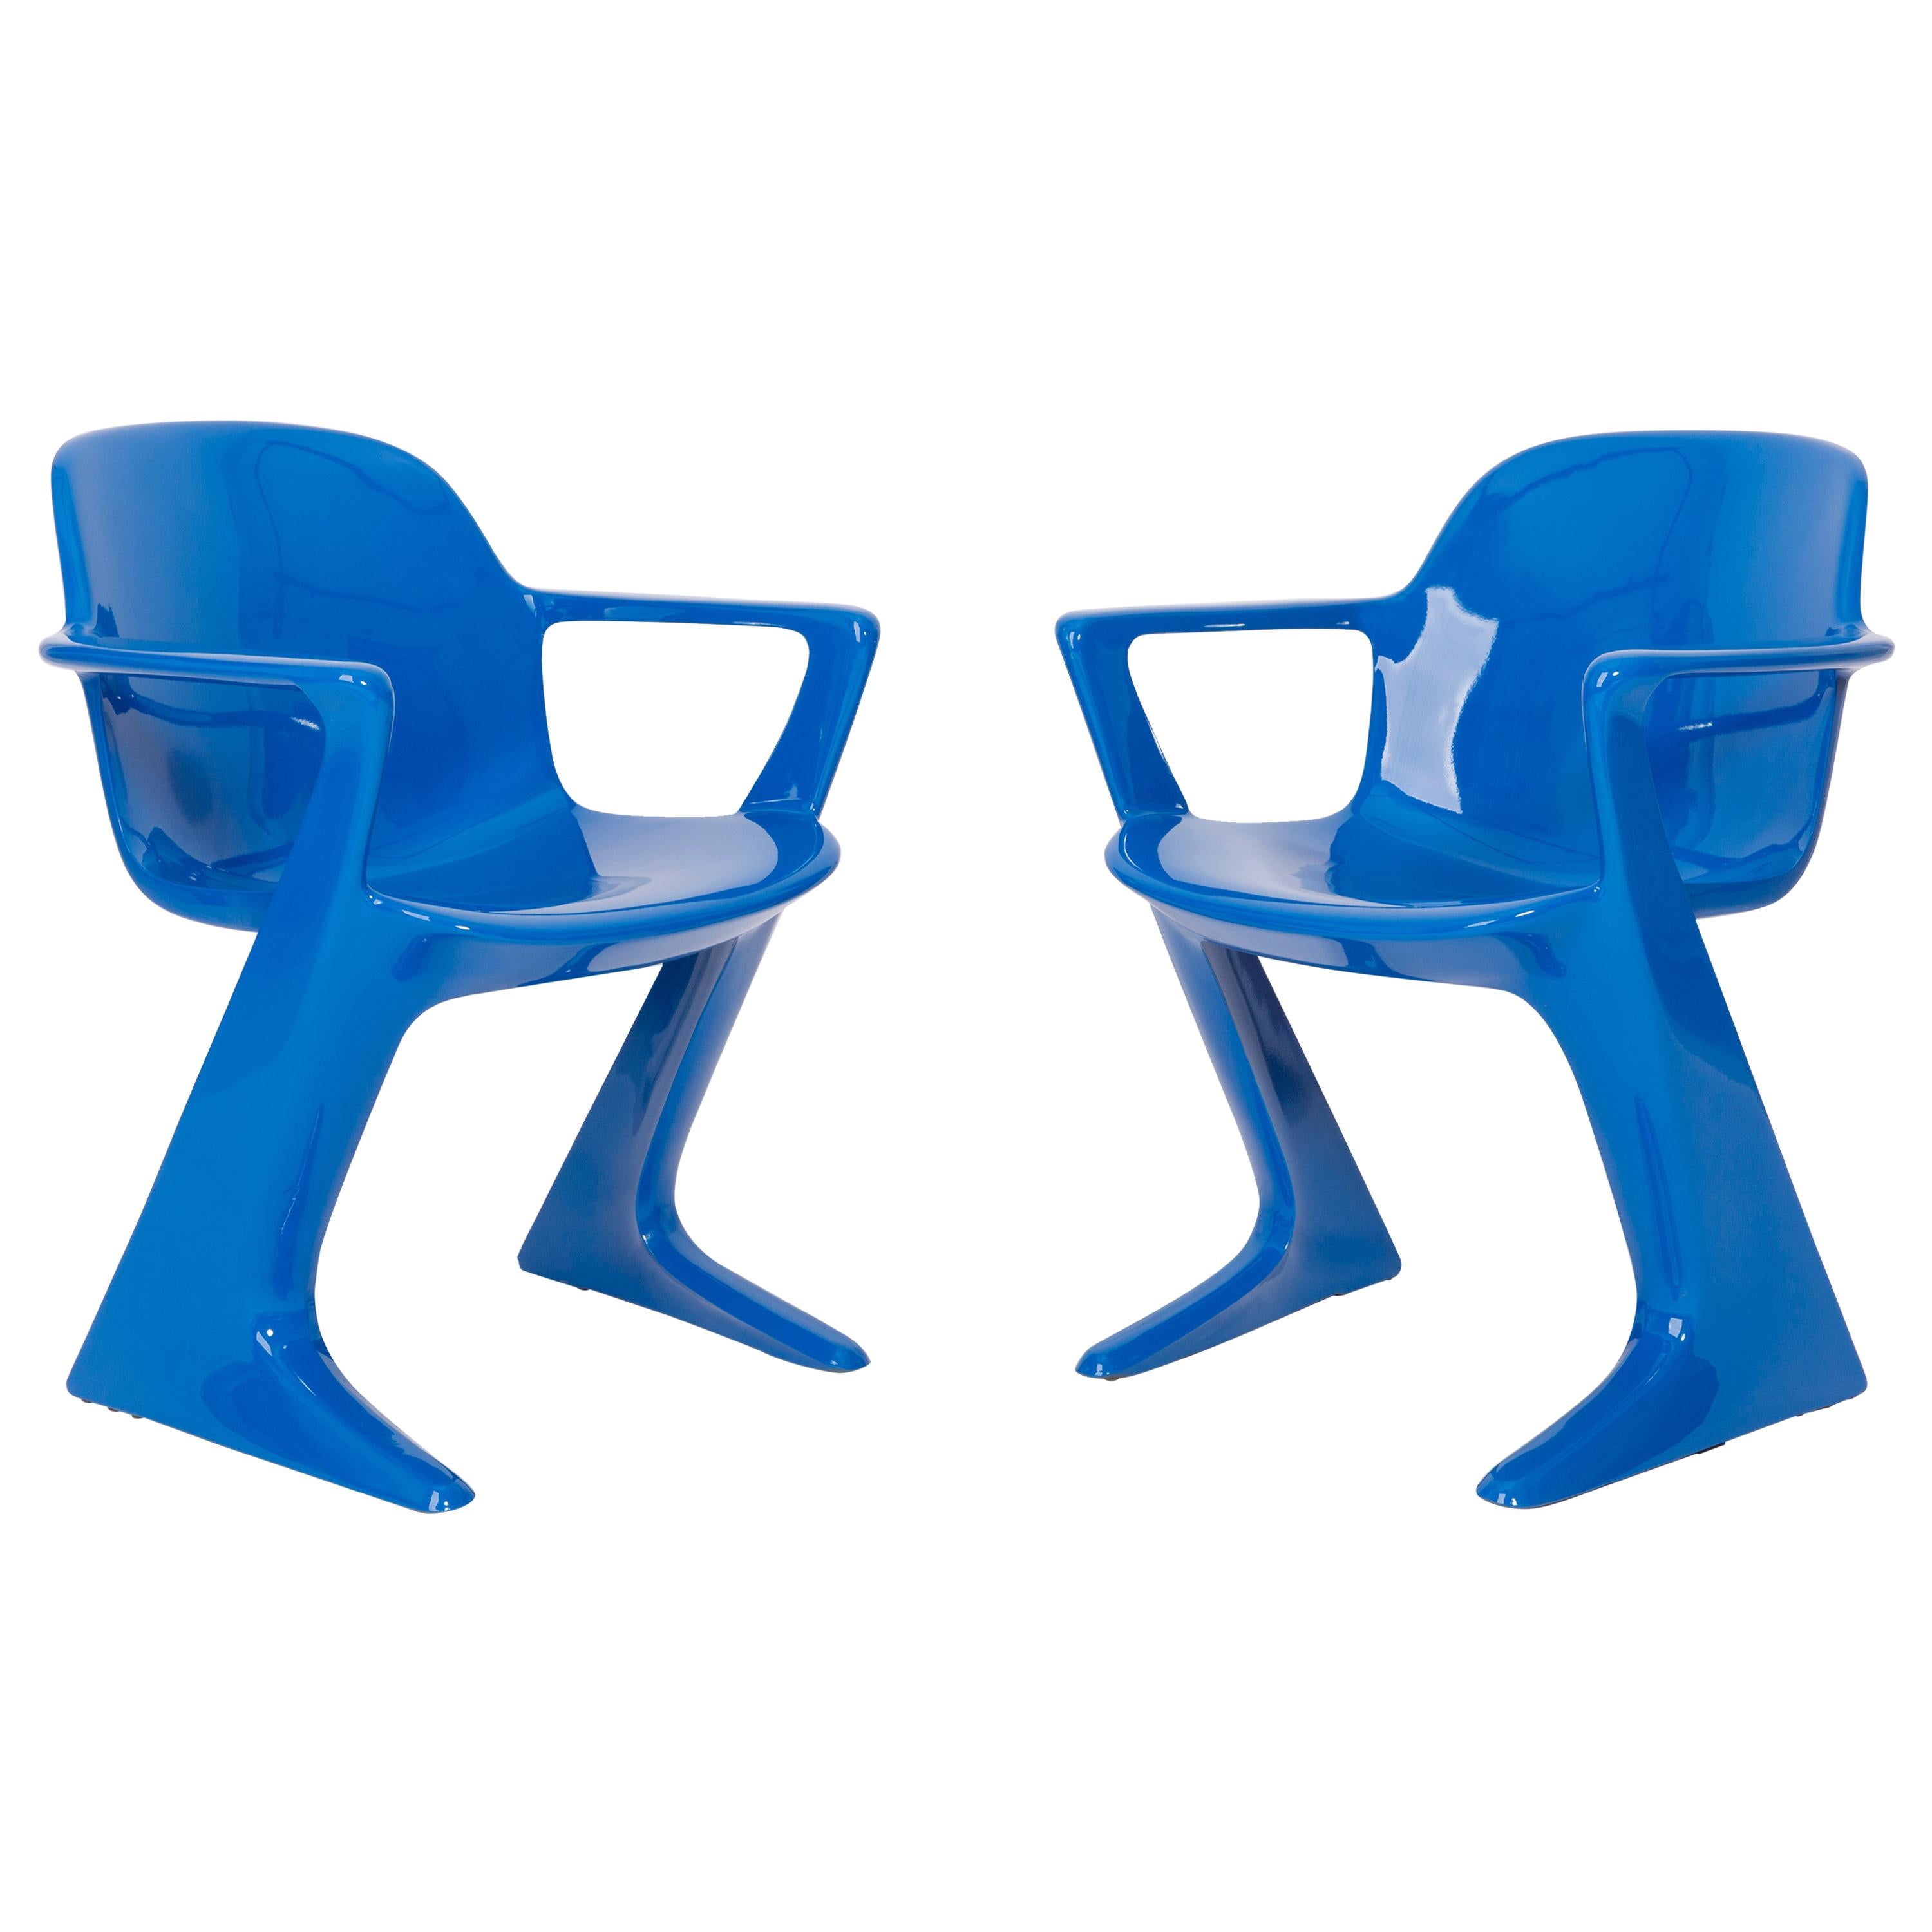 Set of Two Classic Blue Kangaroo Chairs Designed by Ernst Moeckl, Germany, 1968